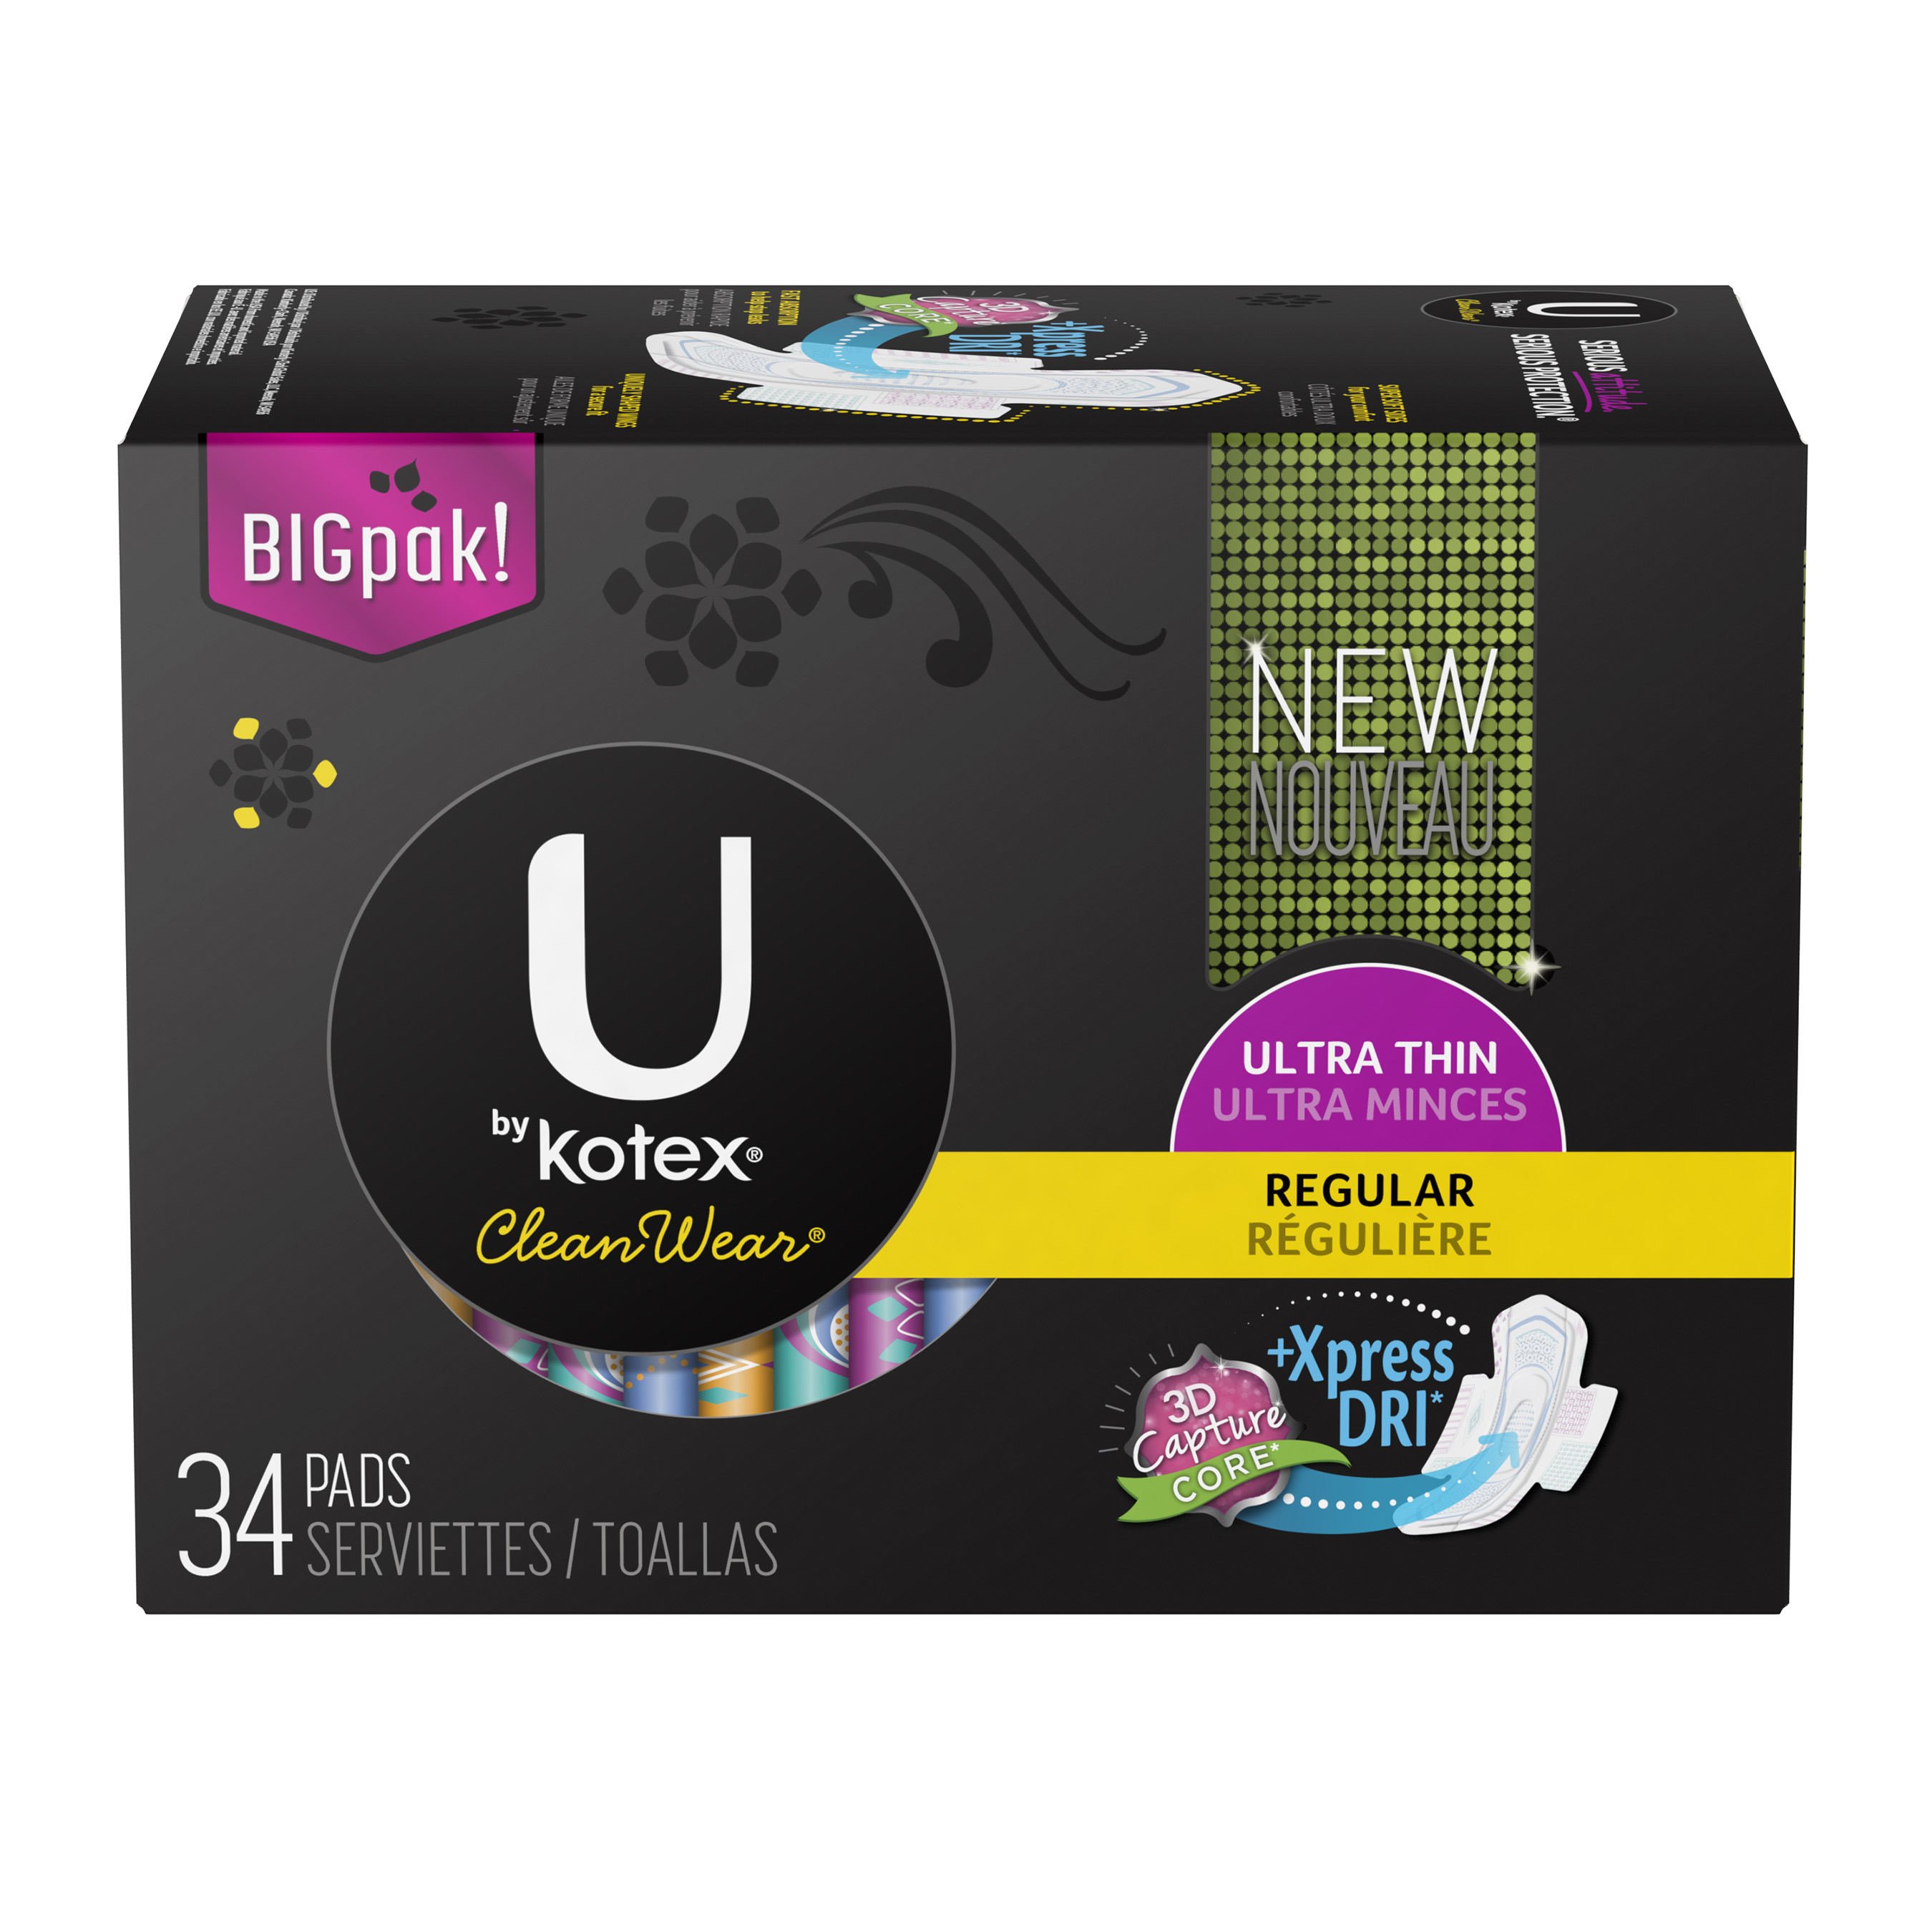 U by Kotex CleanWear Ultra Thin Pads also feature new 3D Capture Core and Xpress DRI Cover, uniquely shaped wings for a secure fit and an ultra thin, four-layer absorbent system.